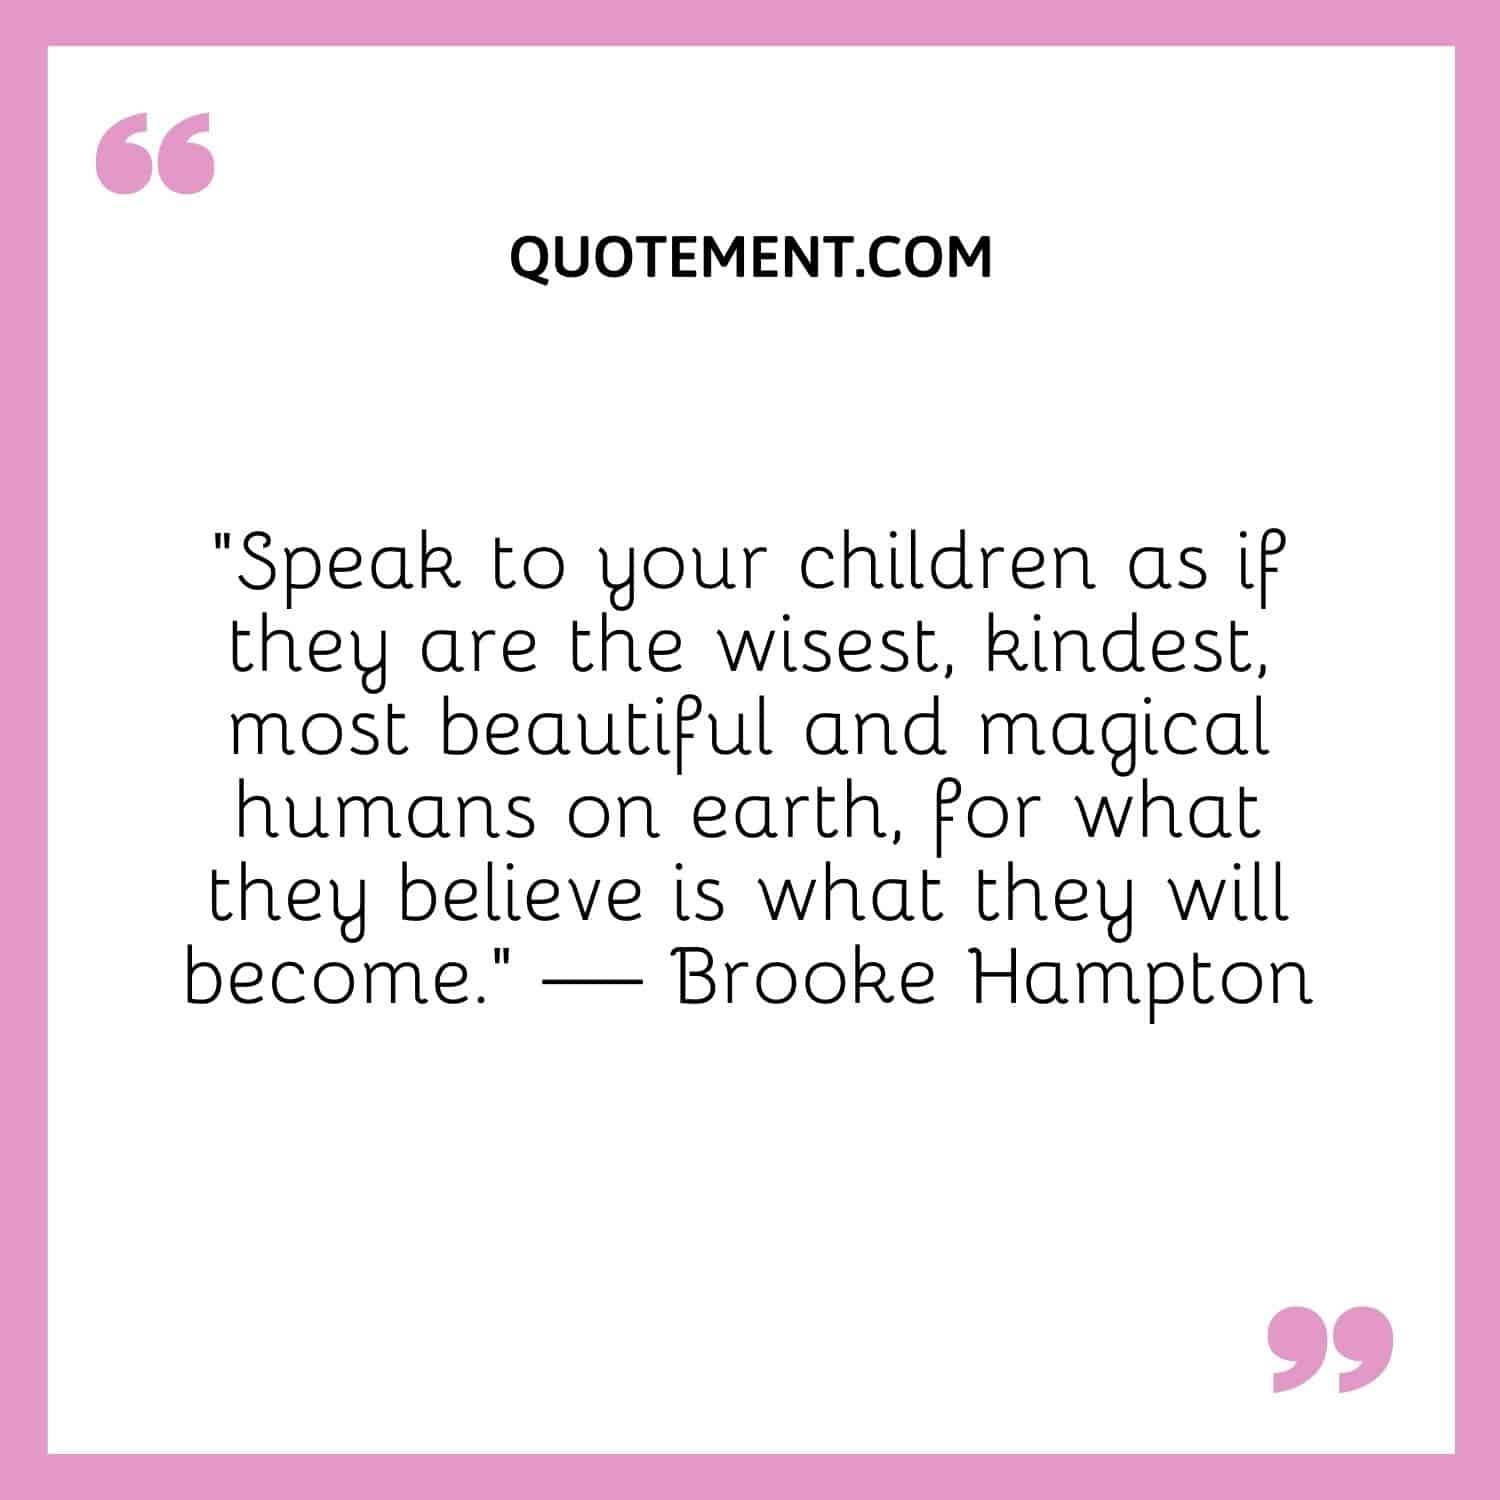 “Speak to your children as if they are the wisest, kindest, most beautiful and magical humans on earth, for what they believe is what they will become.” — Brooke Hampton